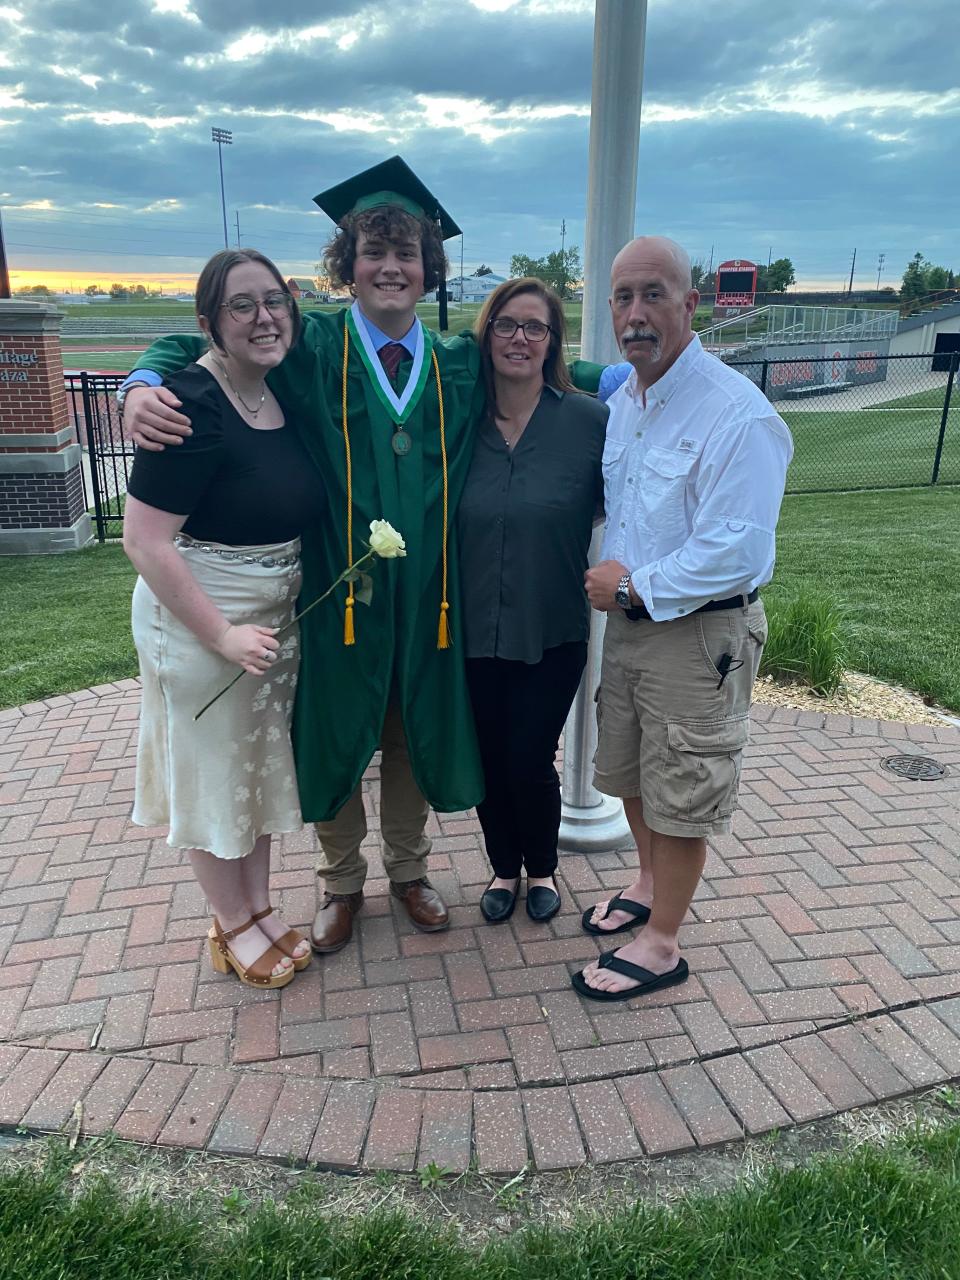 JT poses with his sister Harley, mother Stacy and father Todd at his high school graduation.